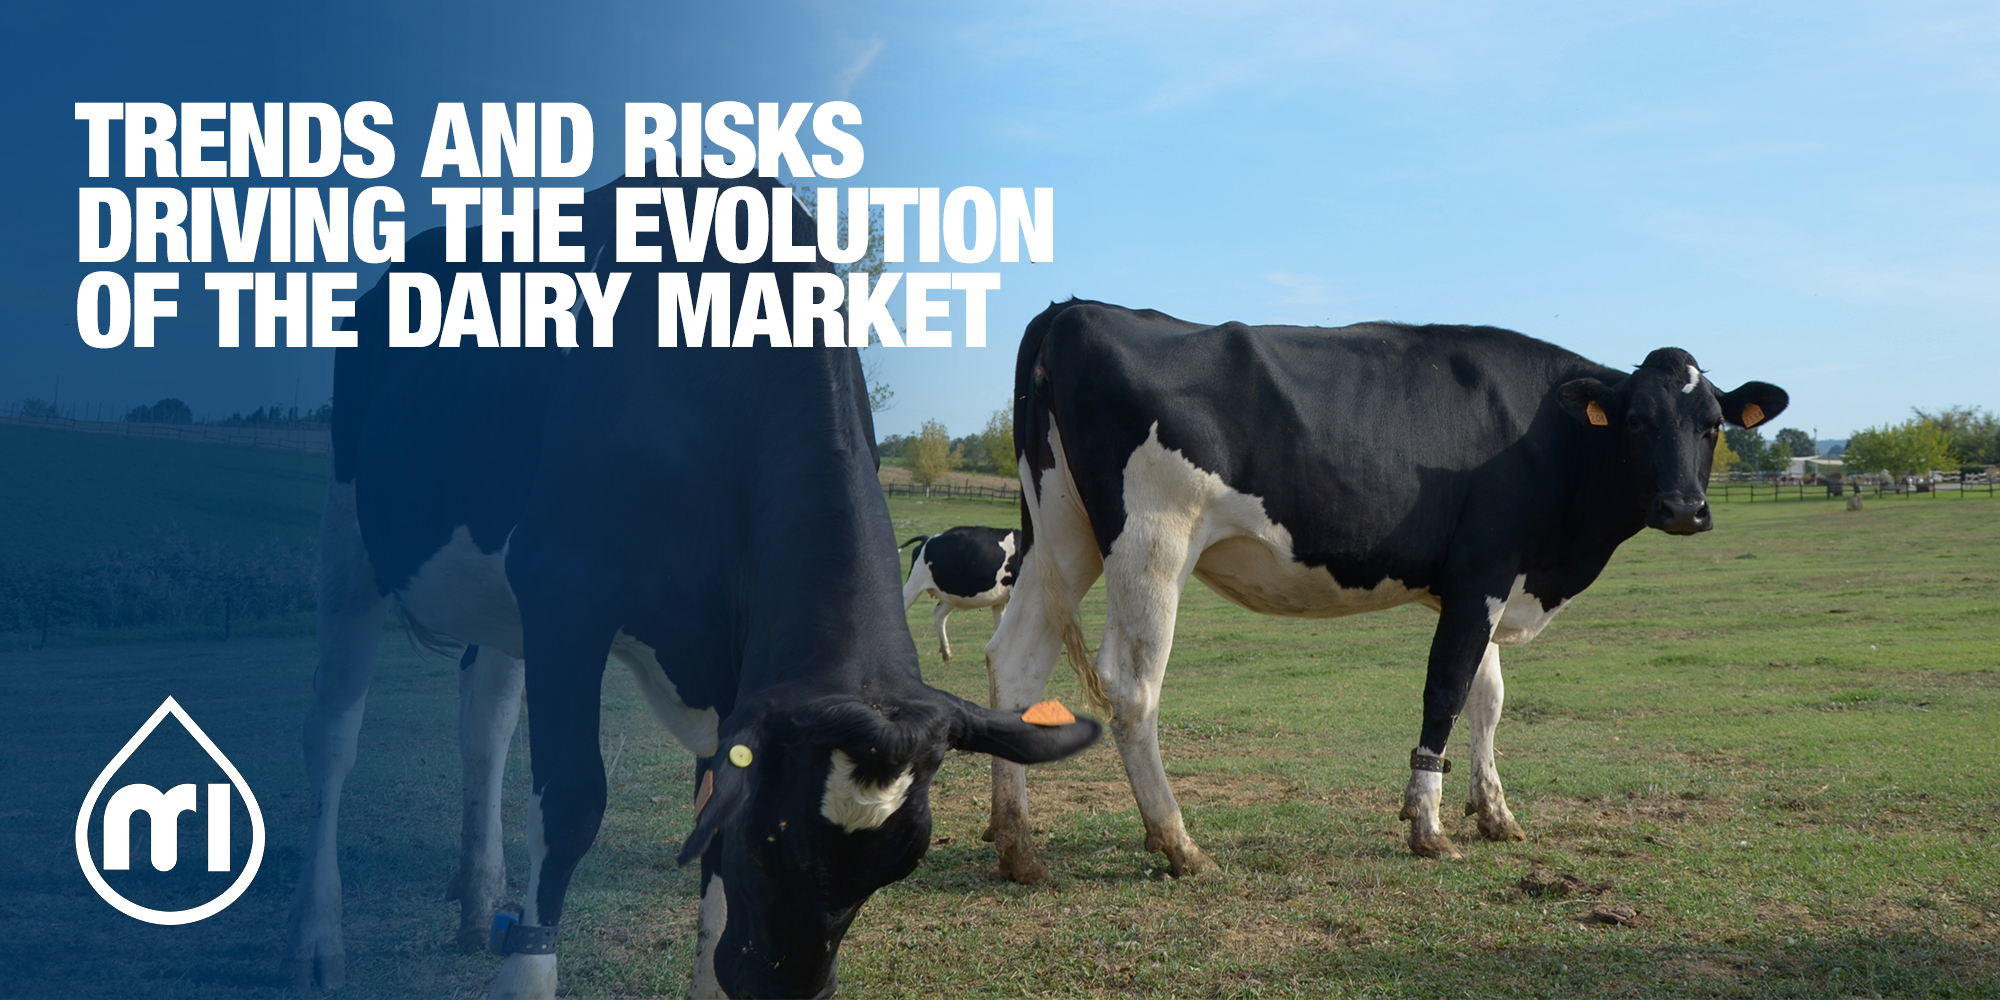 Trends and risks driving the evolution of the dairy market